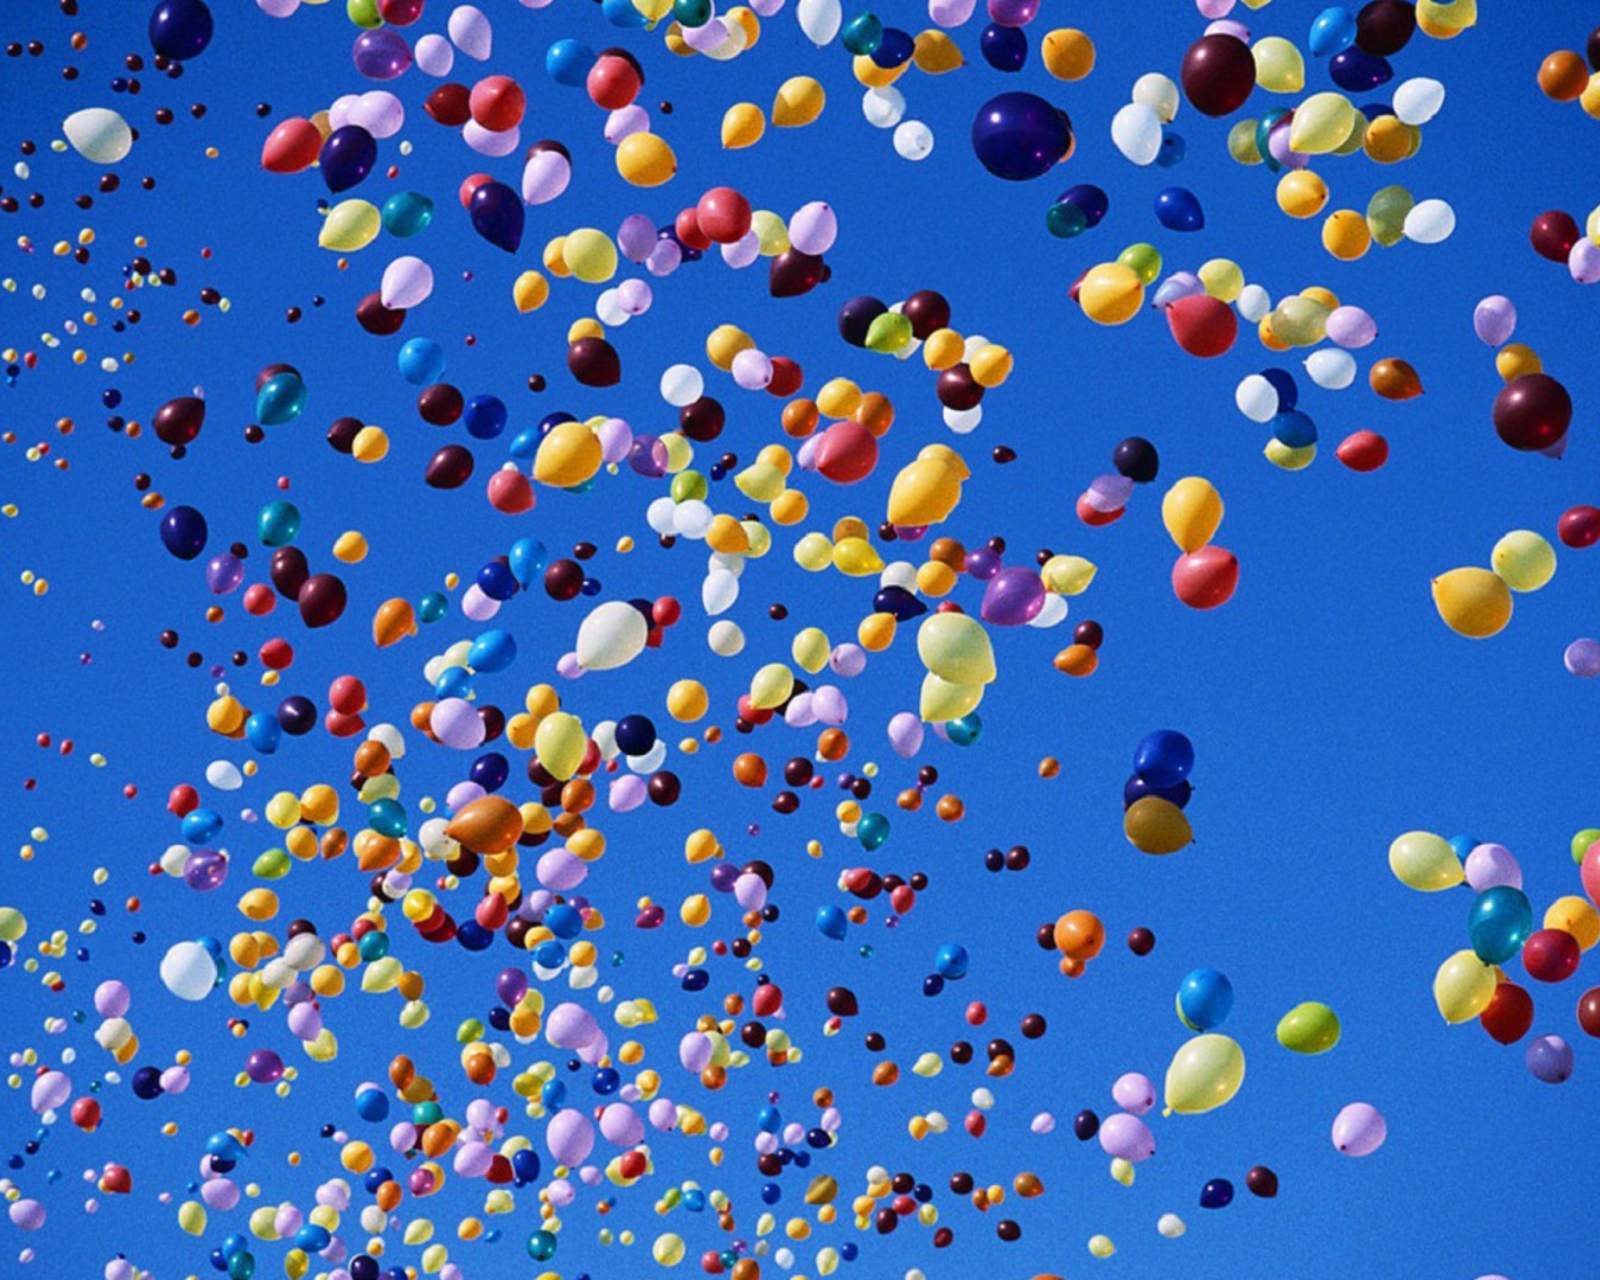 Colorful Balloons In Blue Sky wallpaper 1600x1280